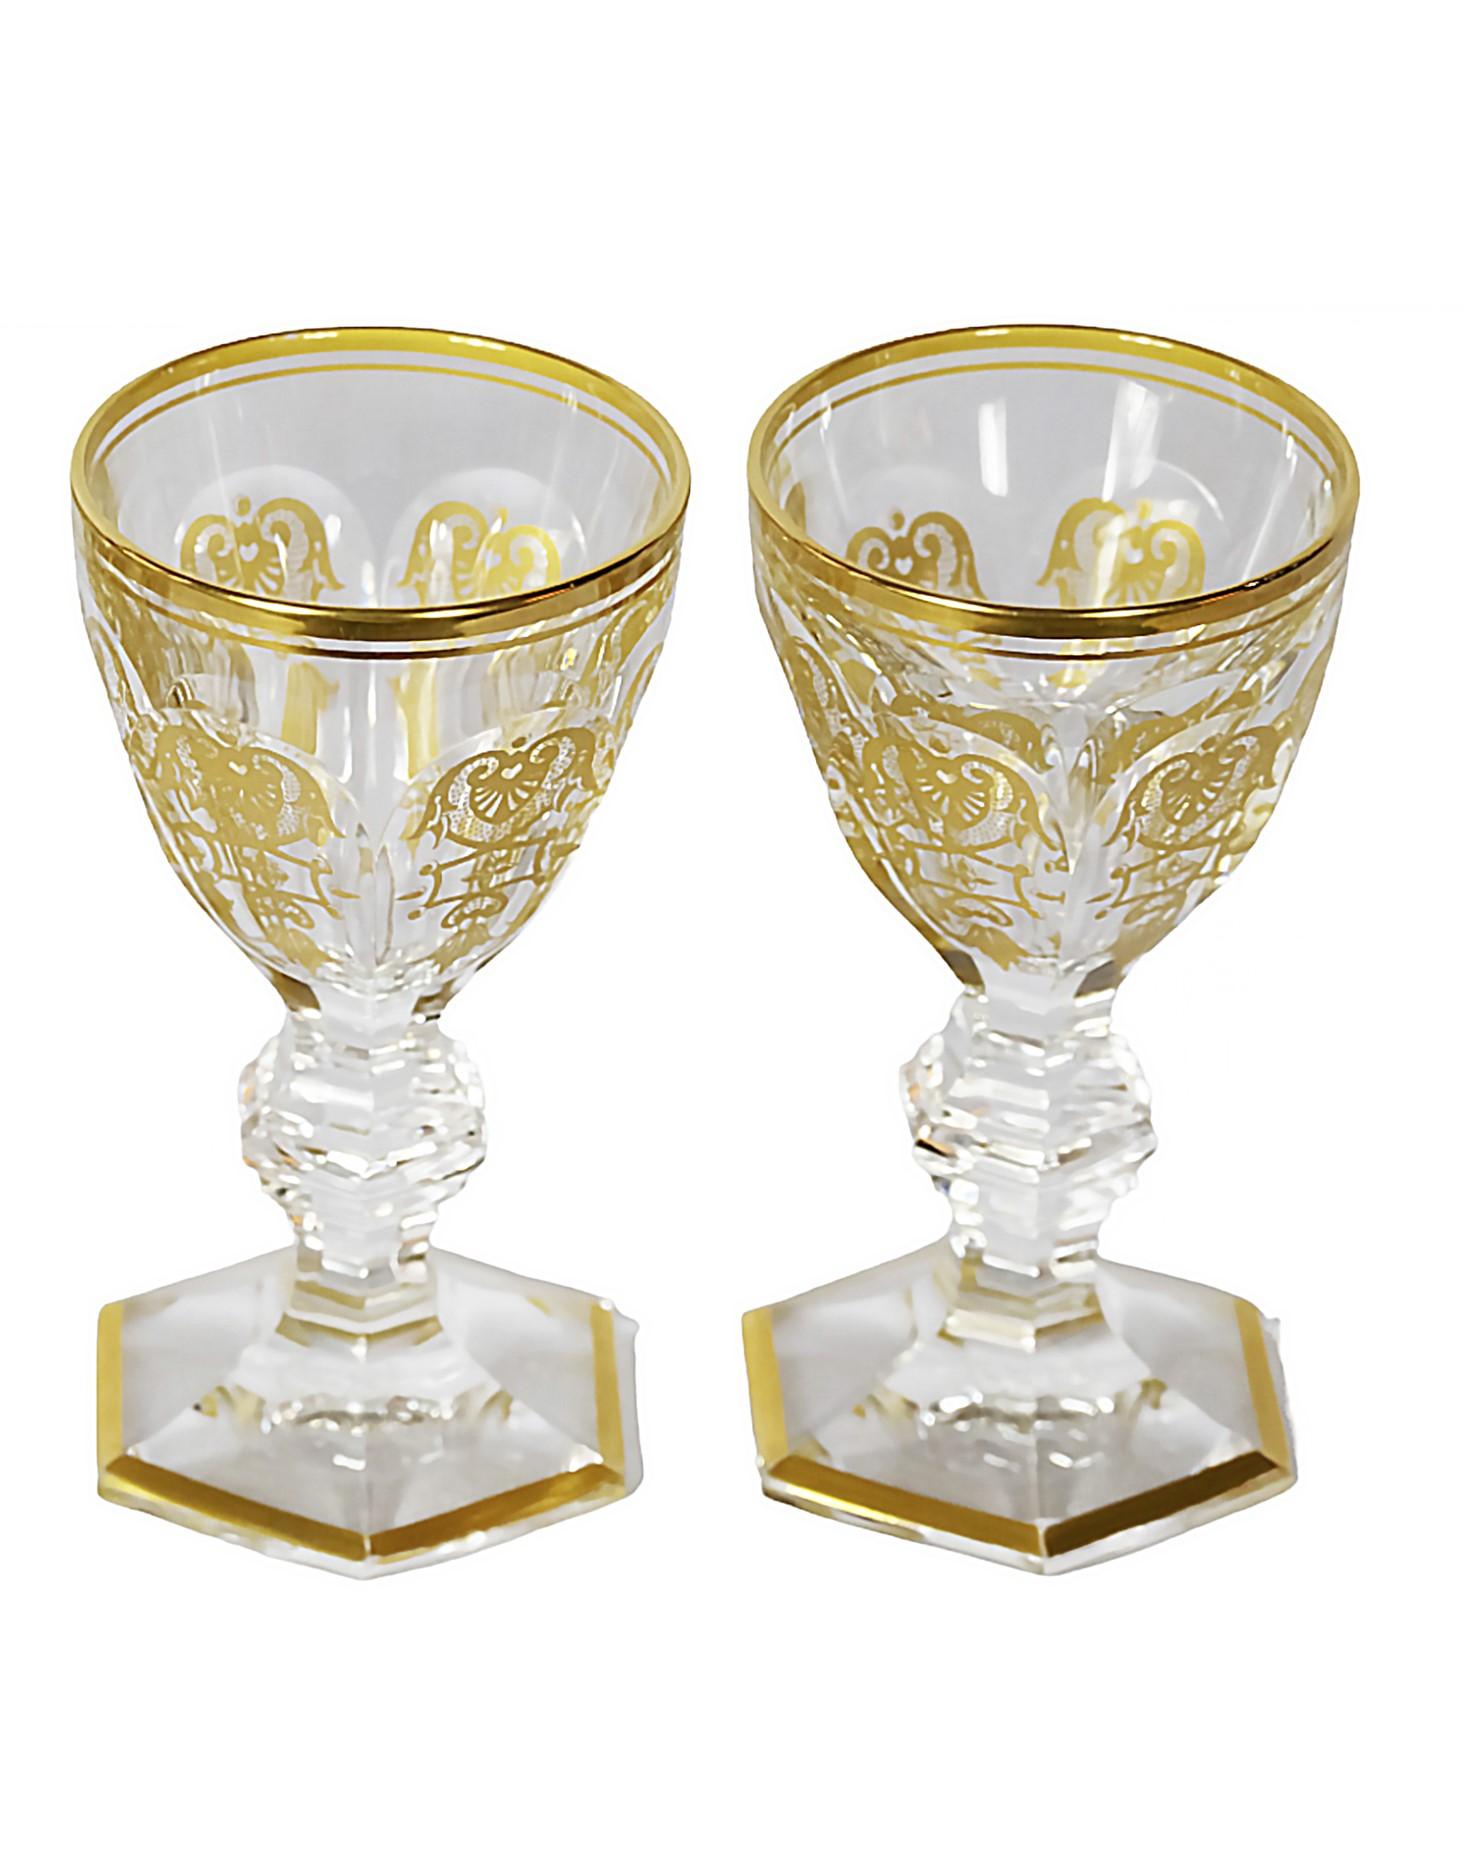 Set of 2 pcs. Baccarat Harcourt Empire collection liqueur glasses.
Marked on the bottom.
Very good condition - like new.

